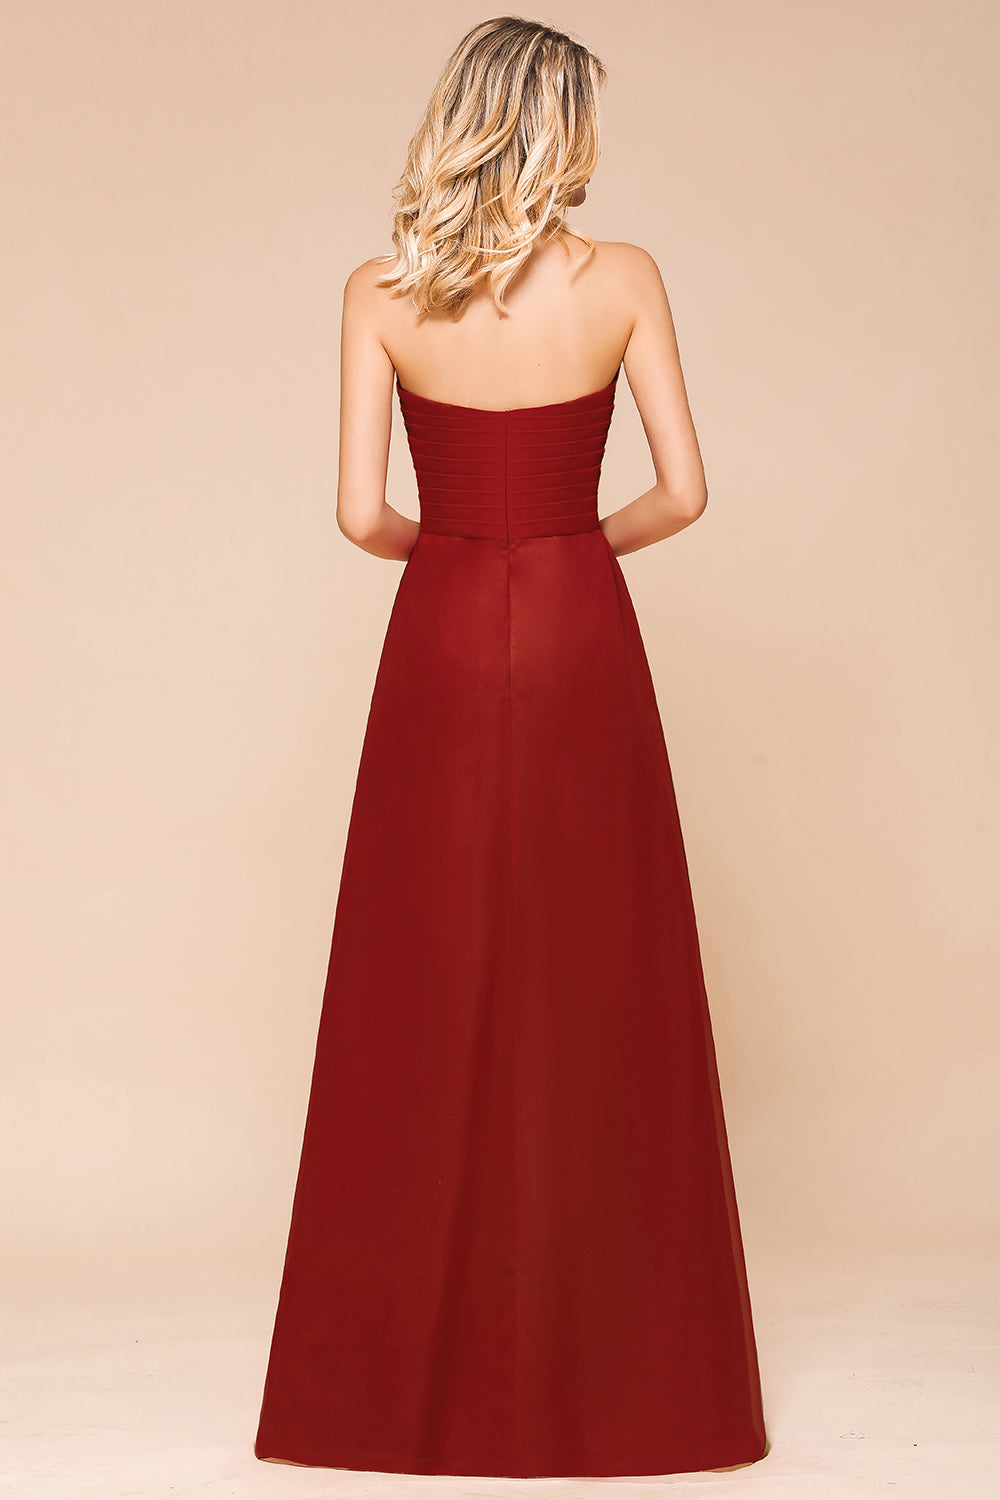 Gorgeous Sweetheart Strapless Rust Bridesmaid Dresses with Ruffle